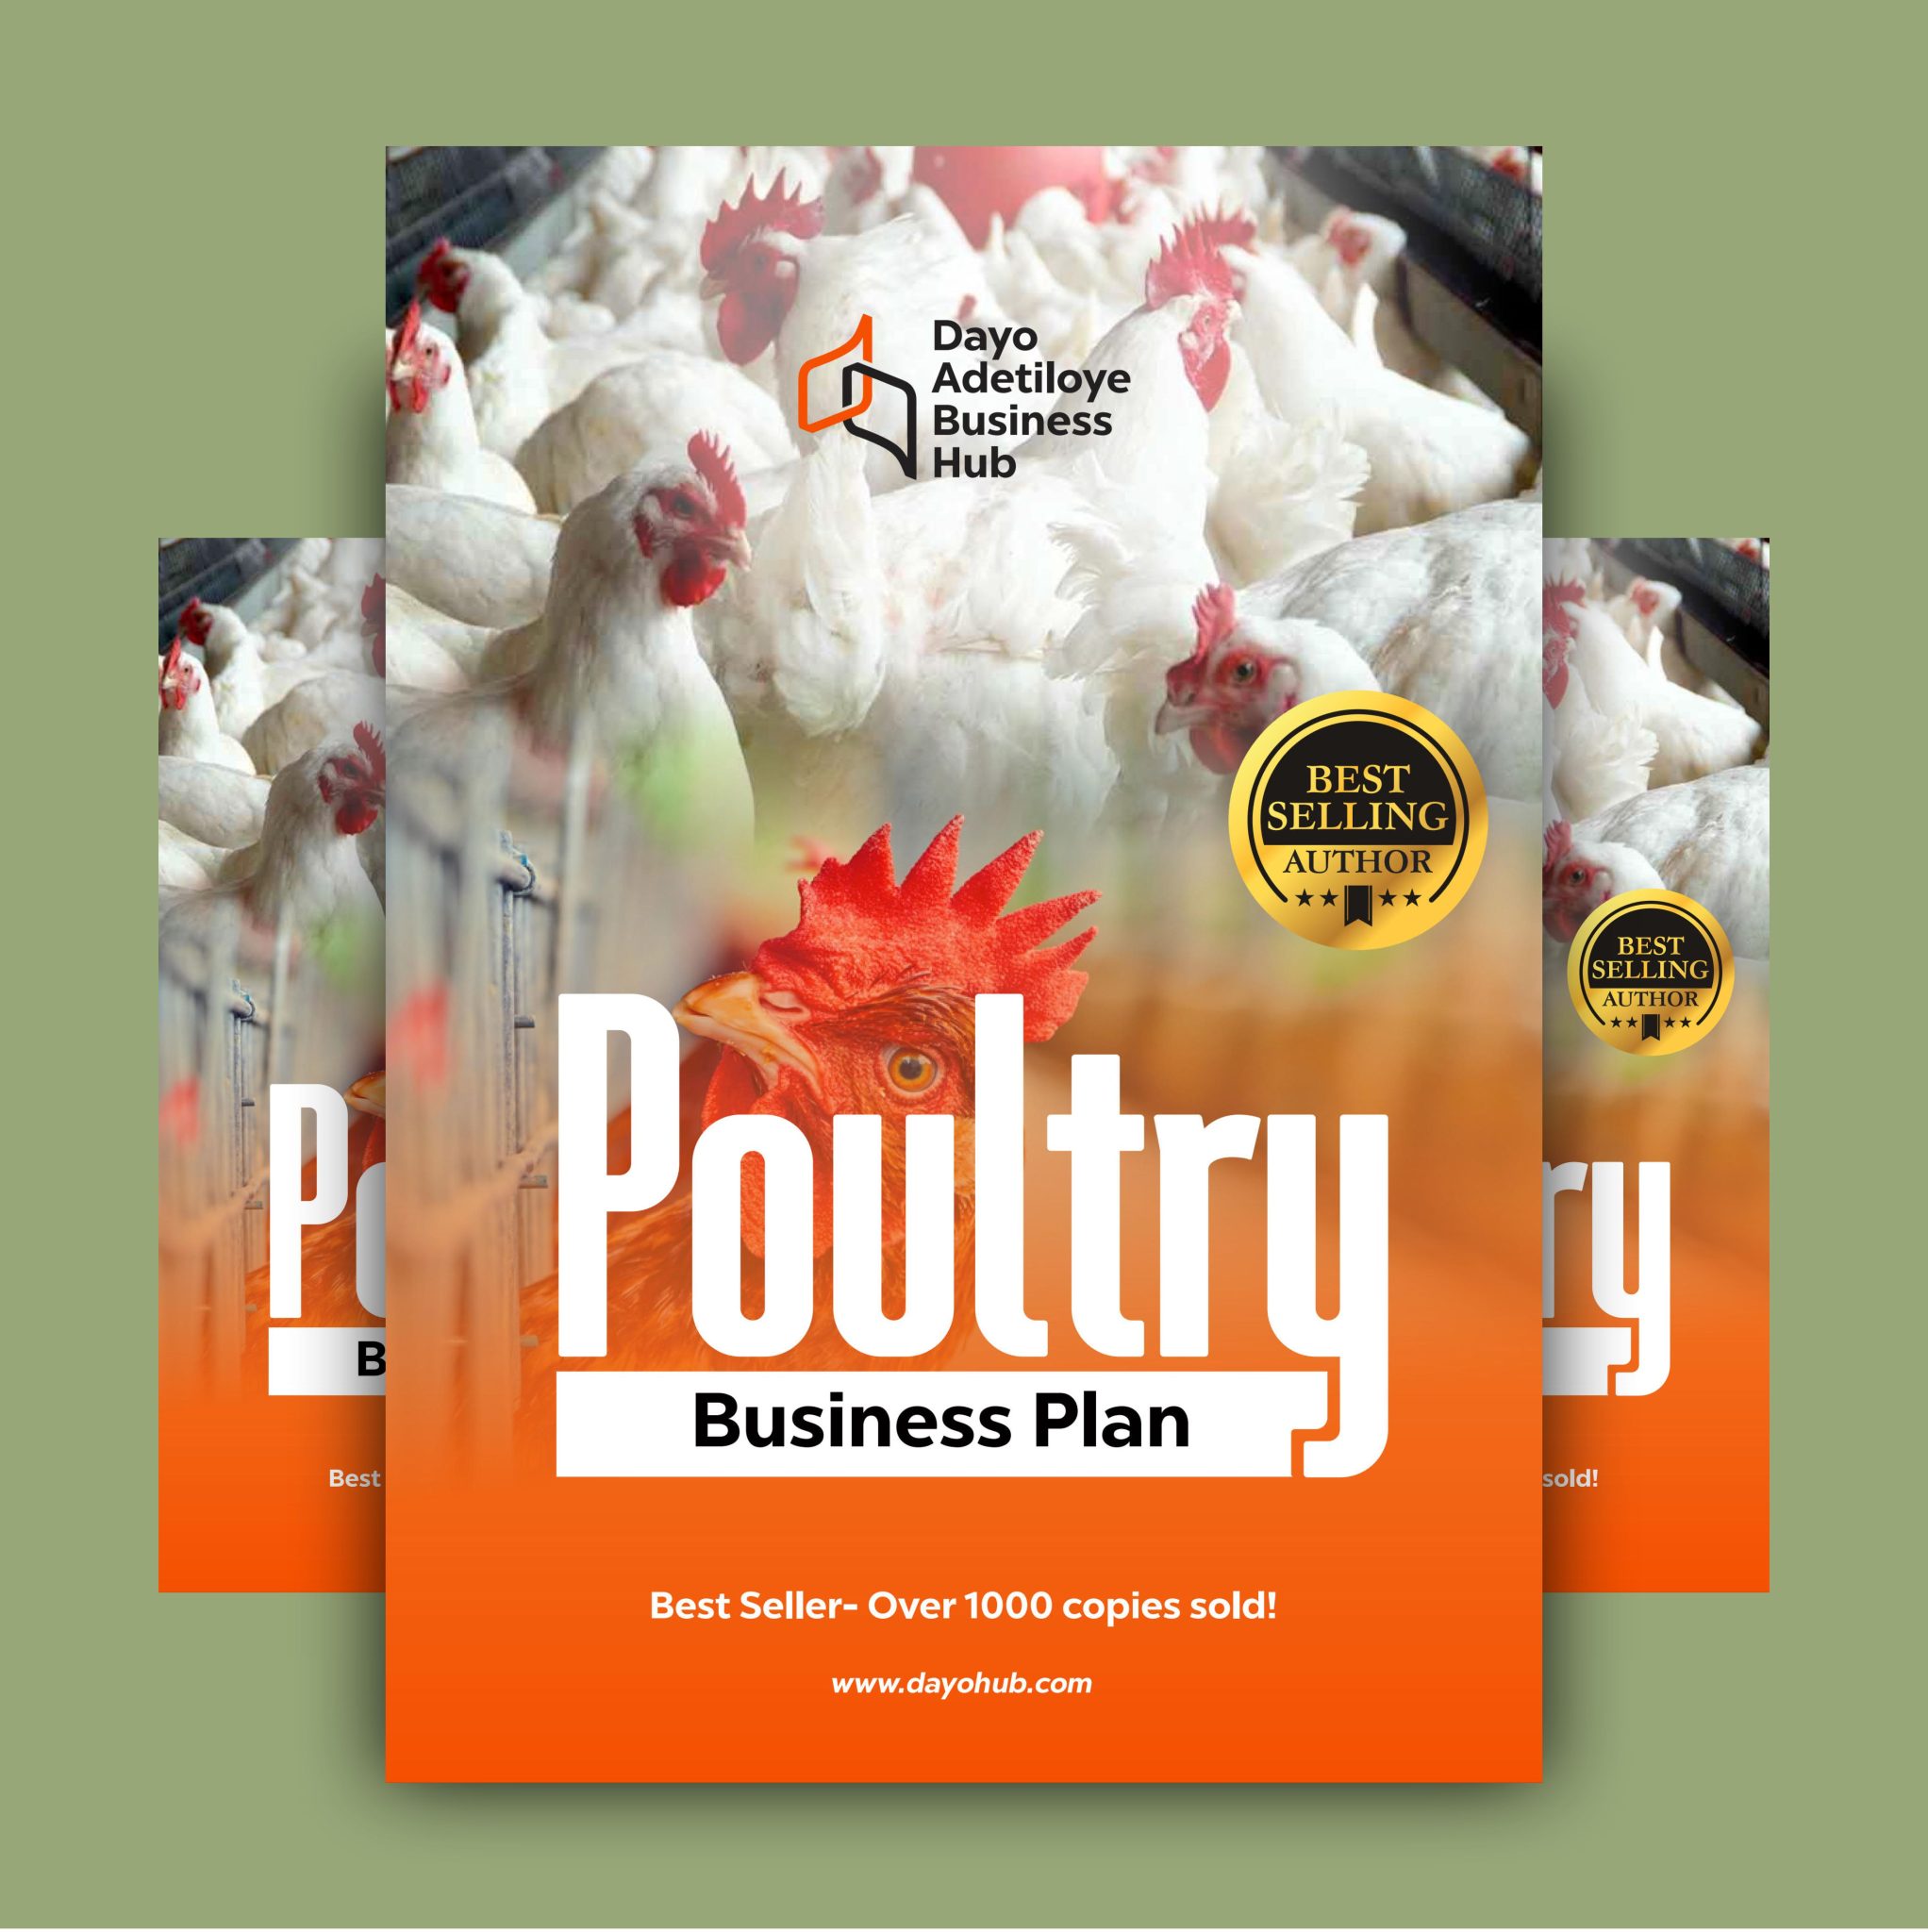 executive summary of a poultry business plan pdf download